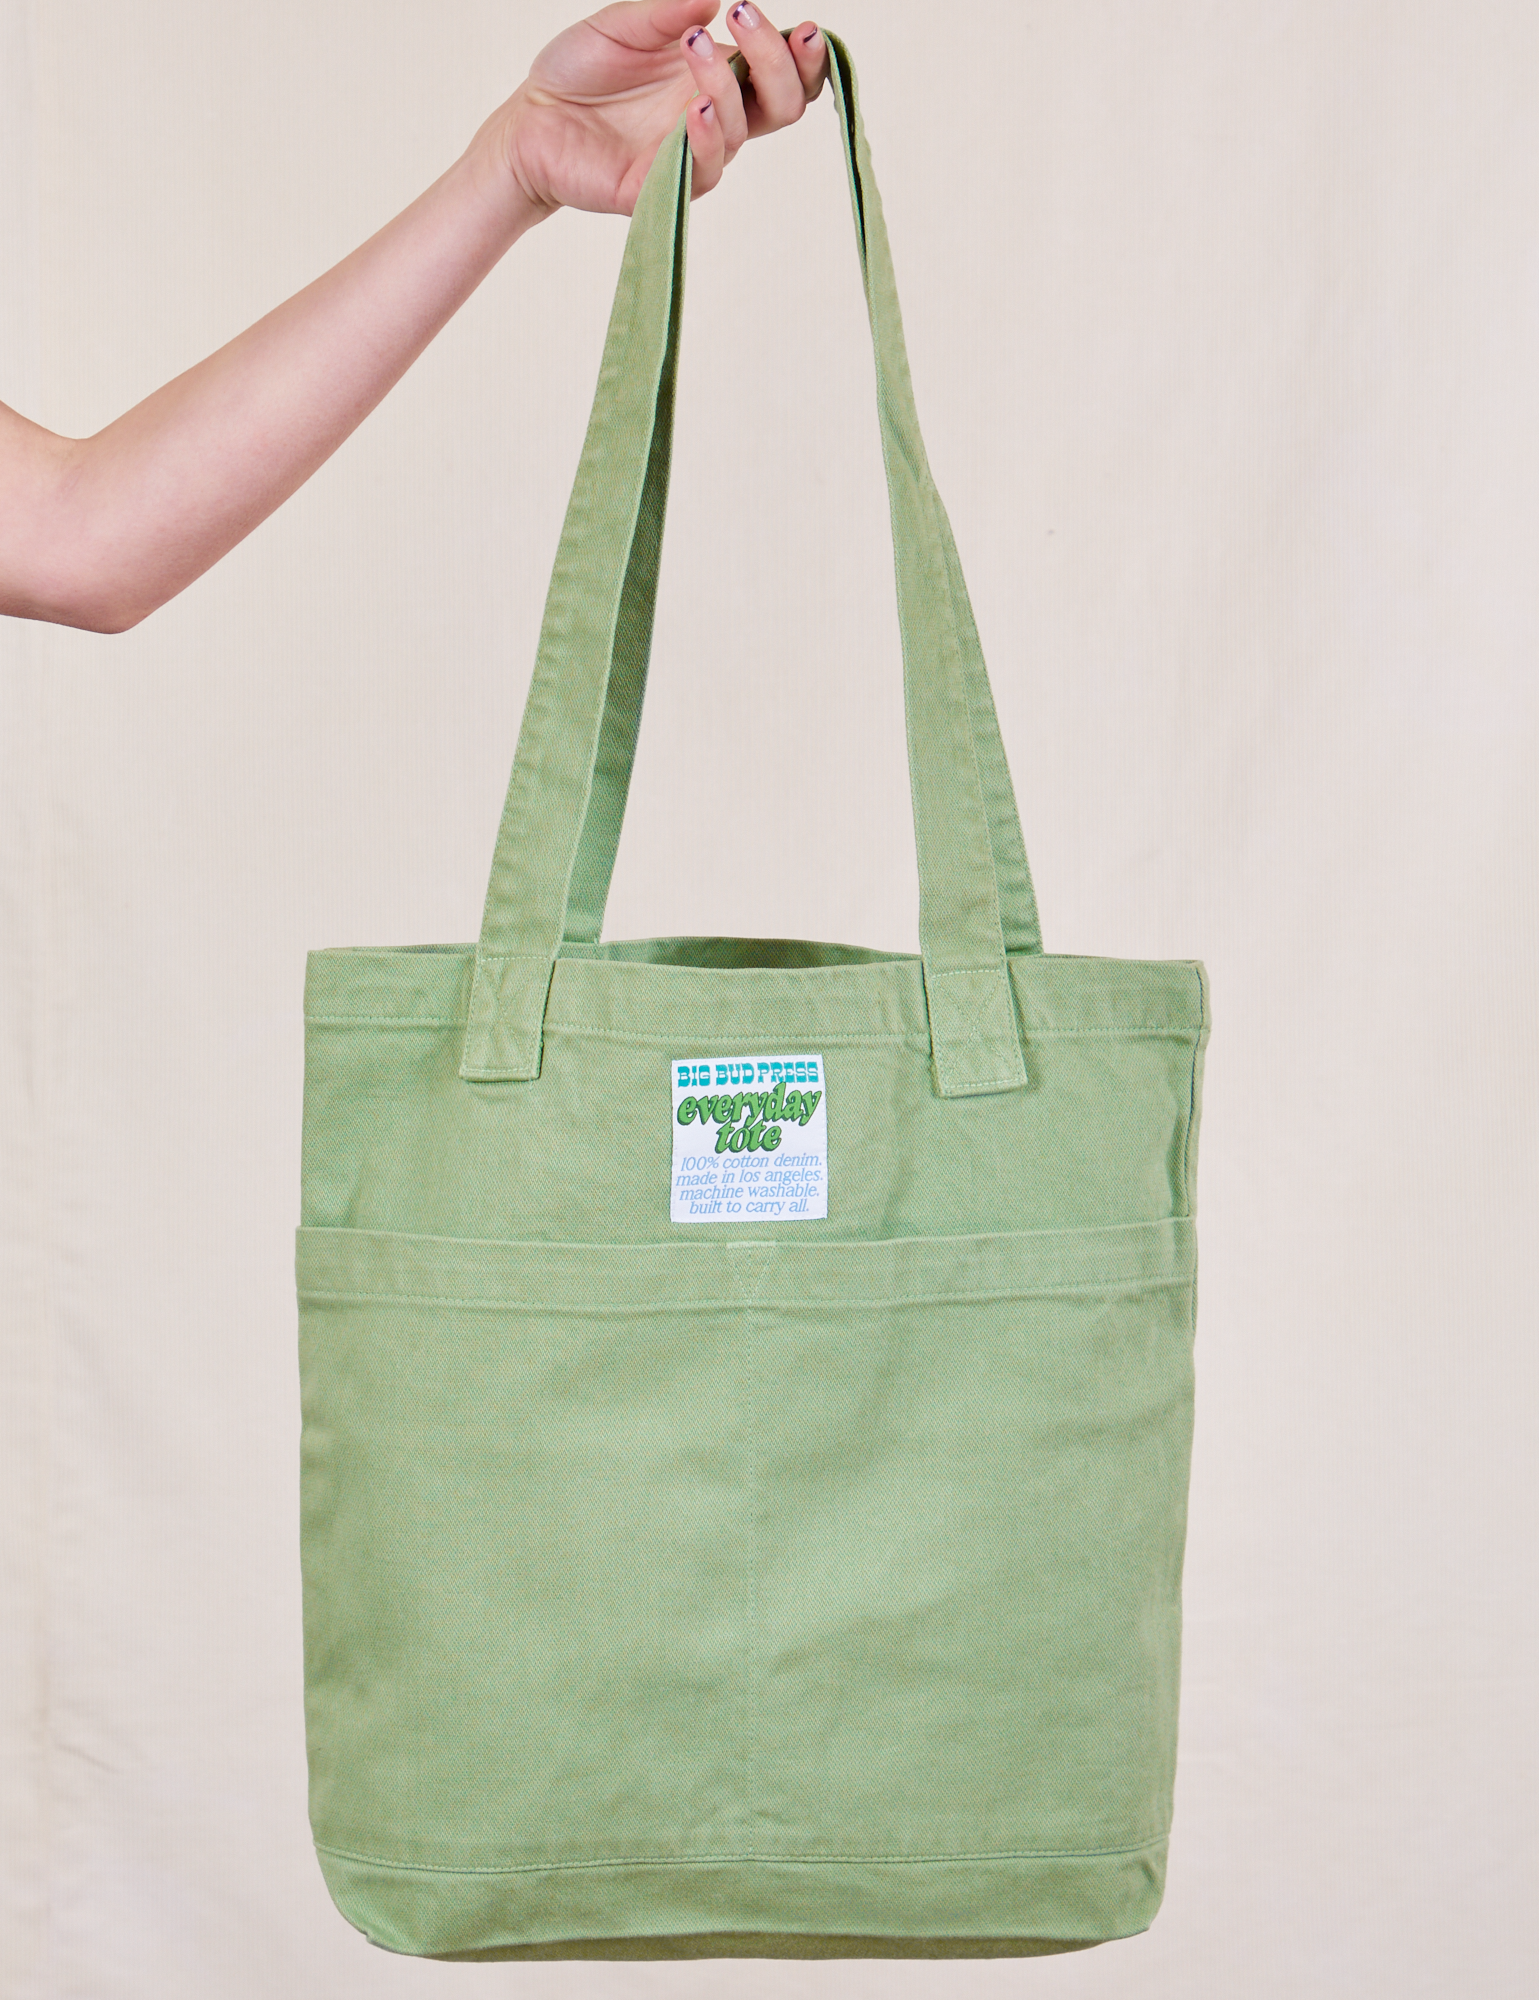 Everyday Tote Bag in Sage Green